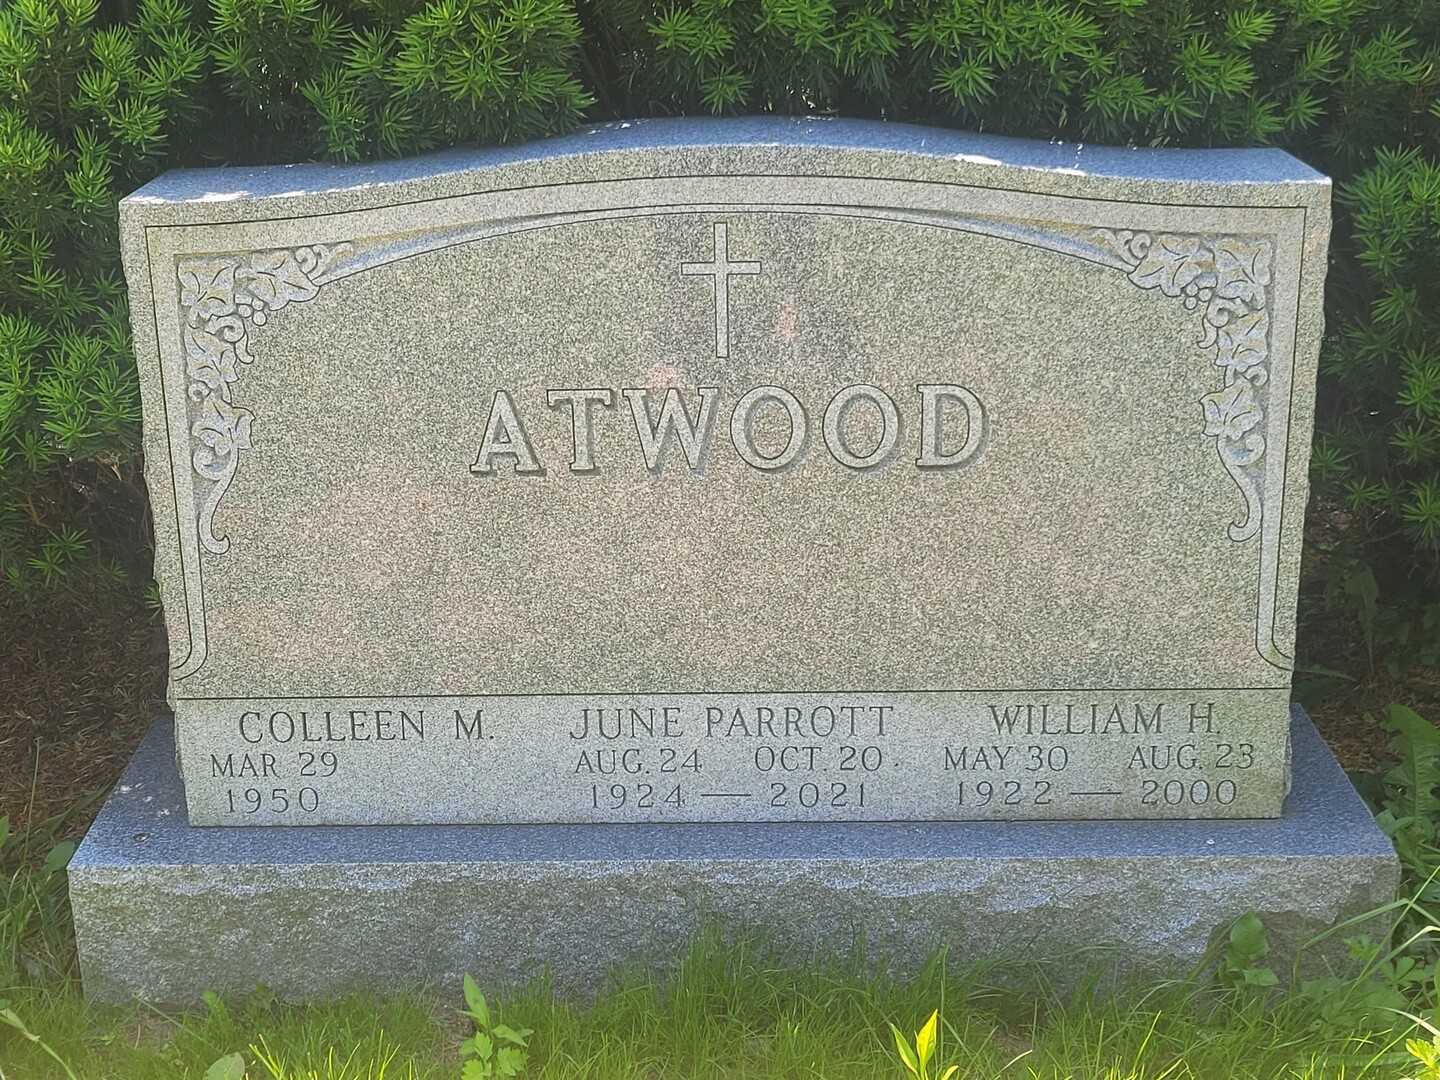 Colleen M. Atwood's grave. Photo 2